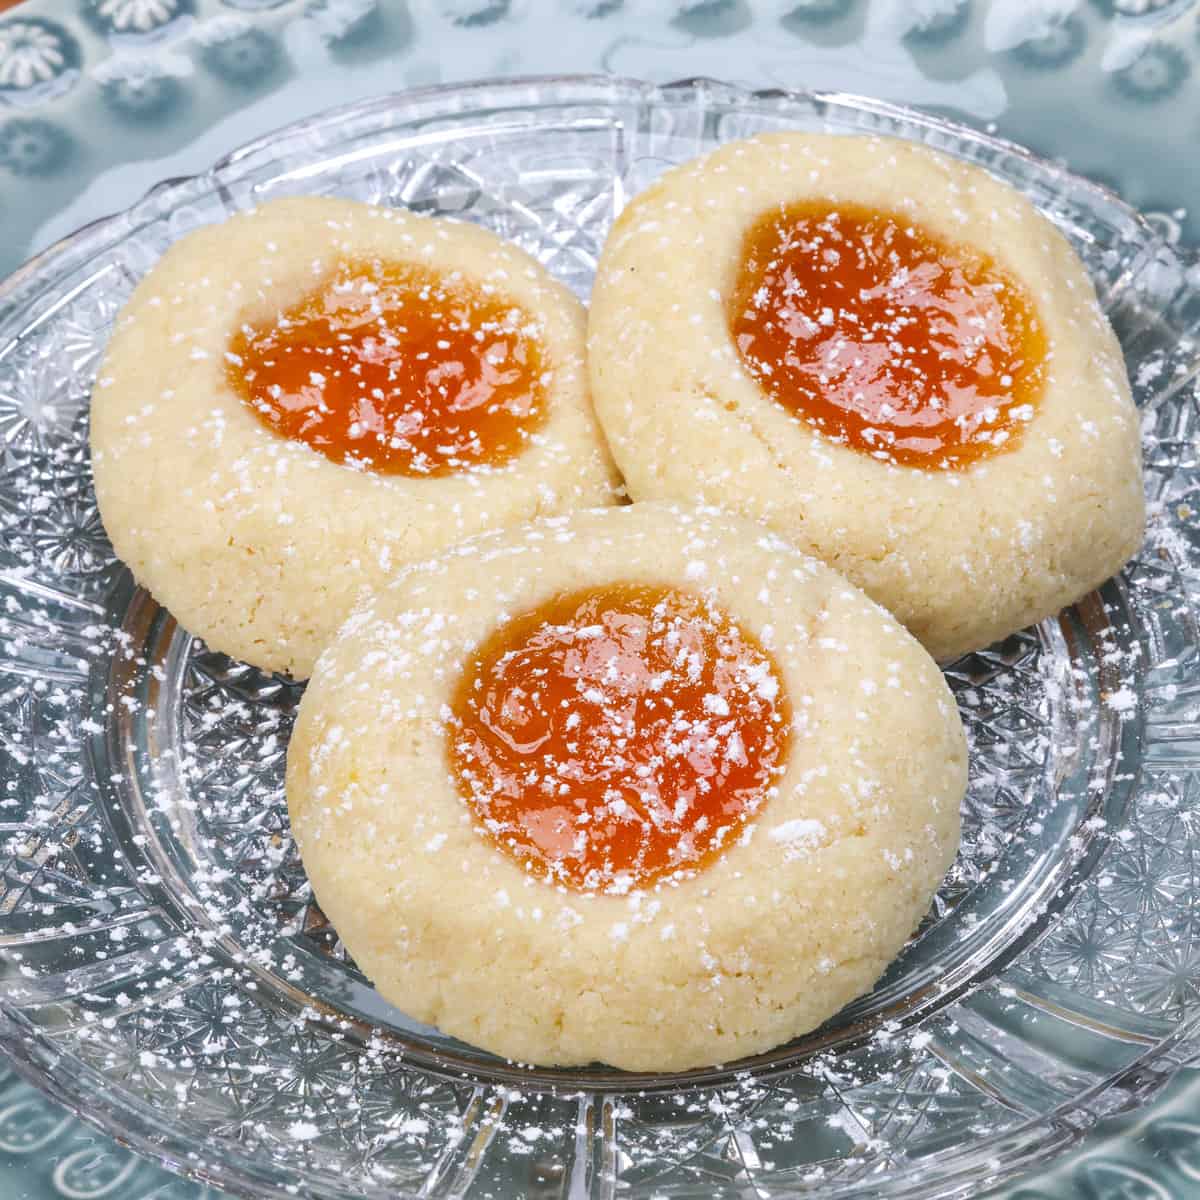 Thumbprint Cookies dusted with powdered sugar on a plate.